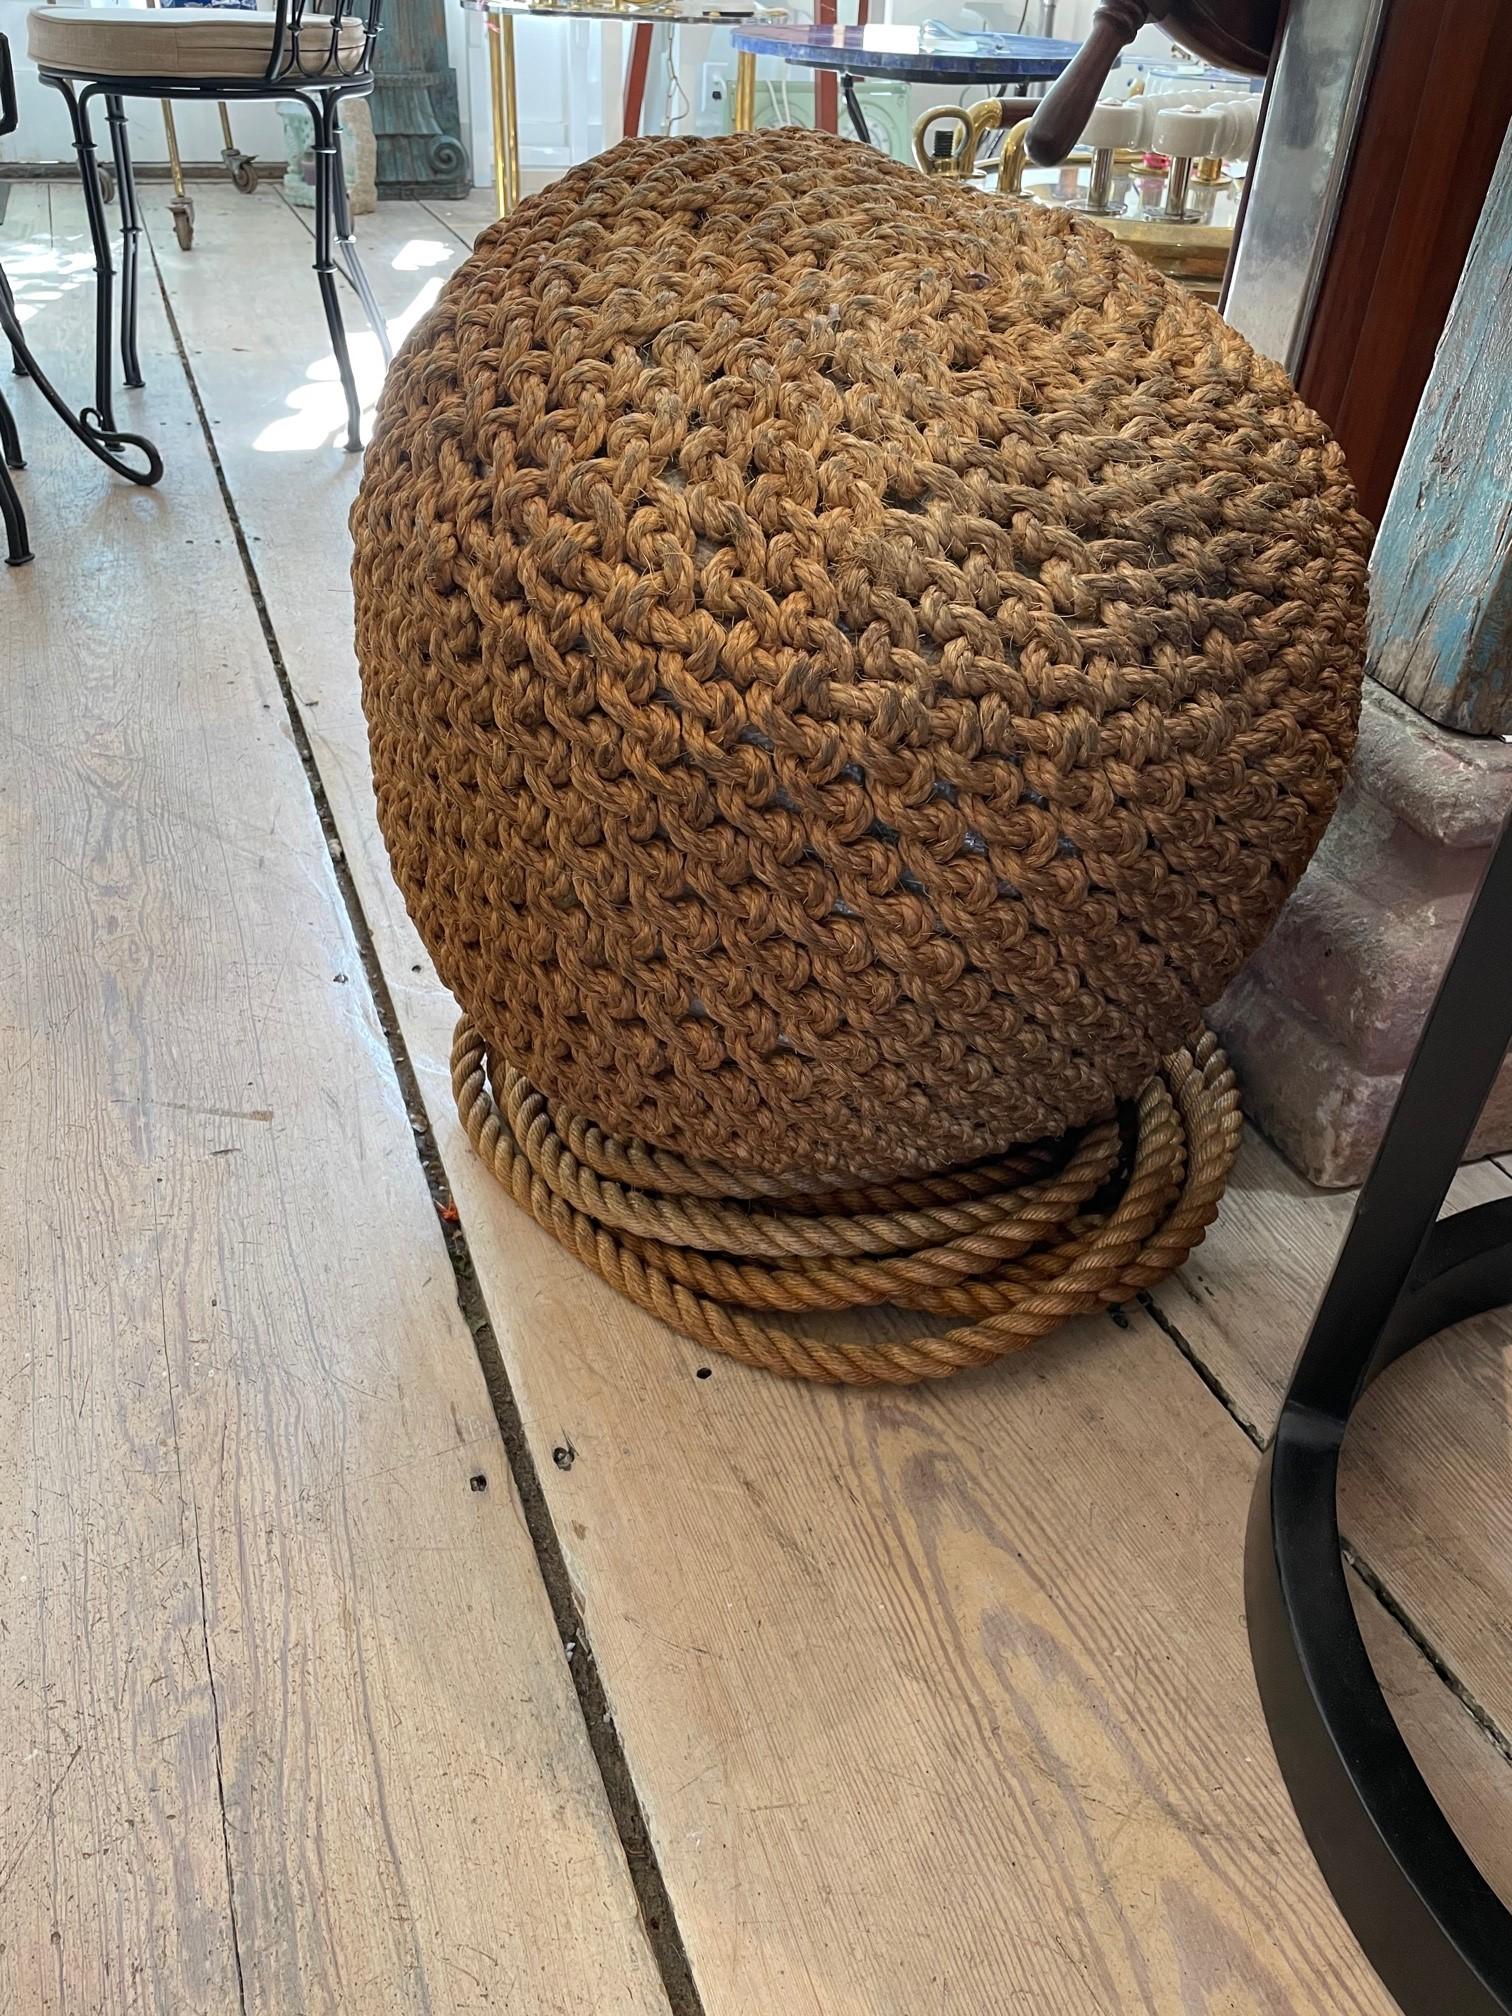 Very large and rare knotted coir rope ship fenders with the original tie-off line. From the 1980's, but barely used. Great to use as coastal or nautical accent pieces, as foot rests or stools. Organic, textural and interesting.